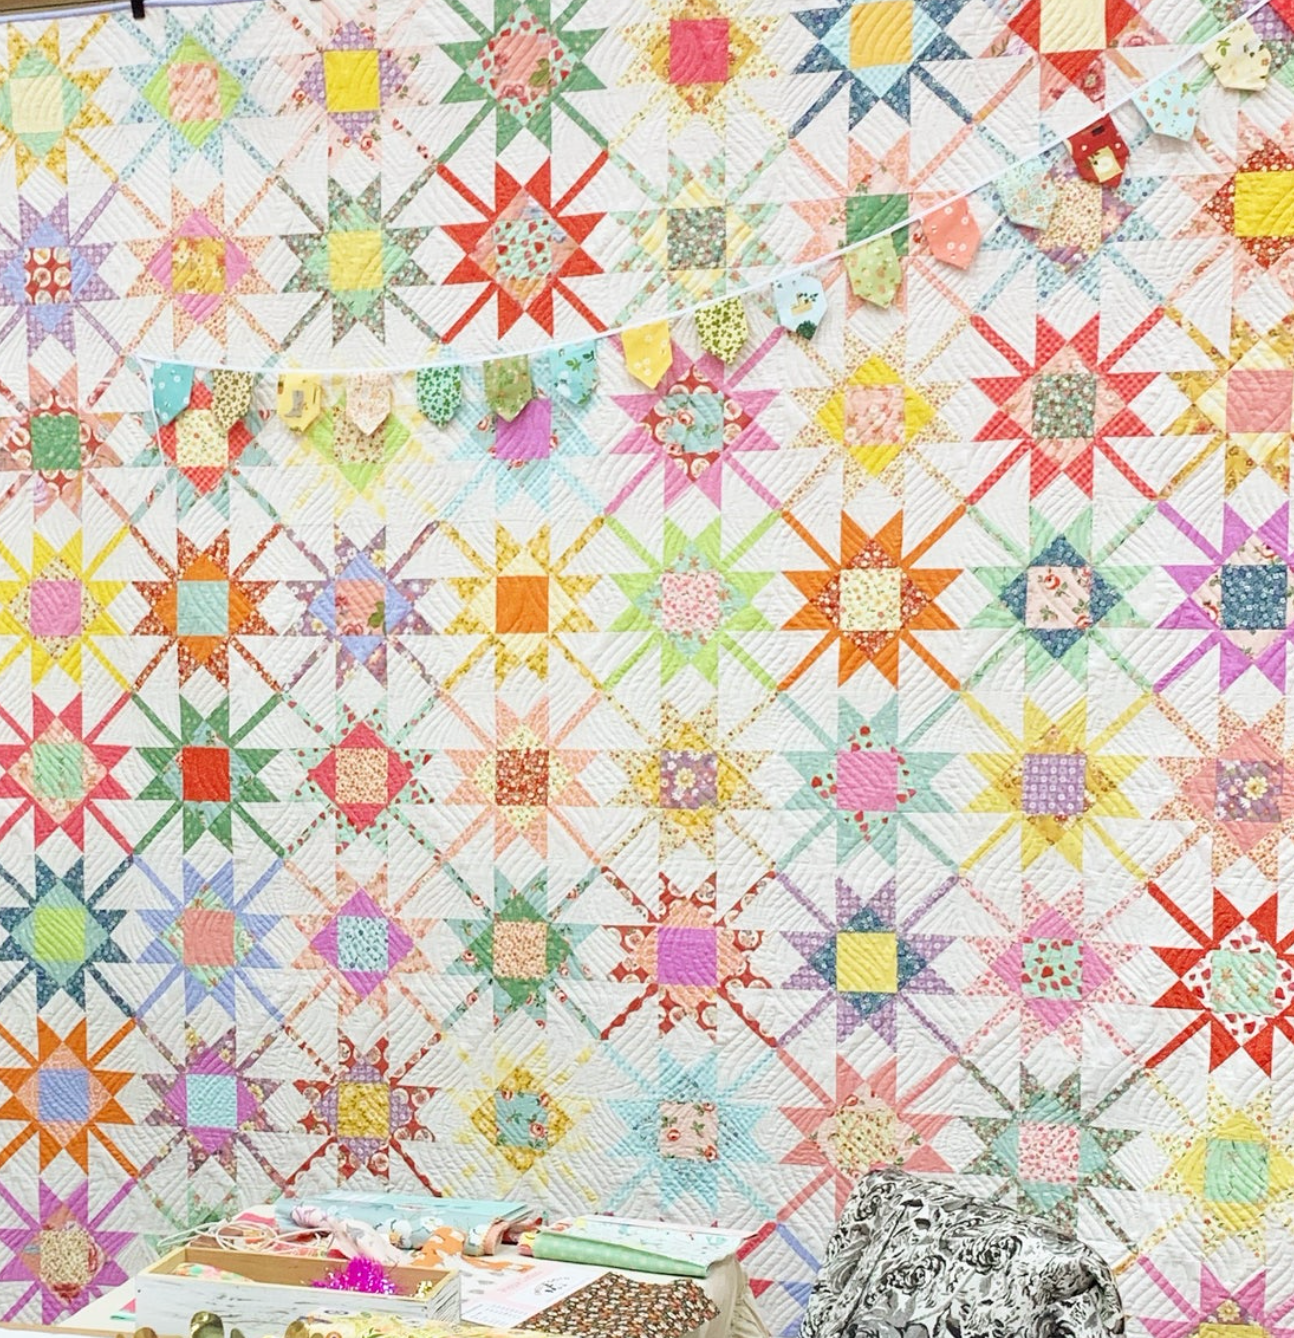 Delightful Dahlia Quilt, from the Forget Me Not Collection, a STASH BUSTER PATTERN!